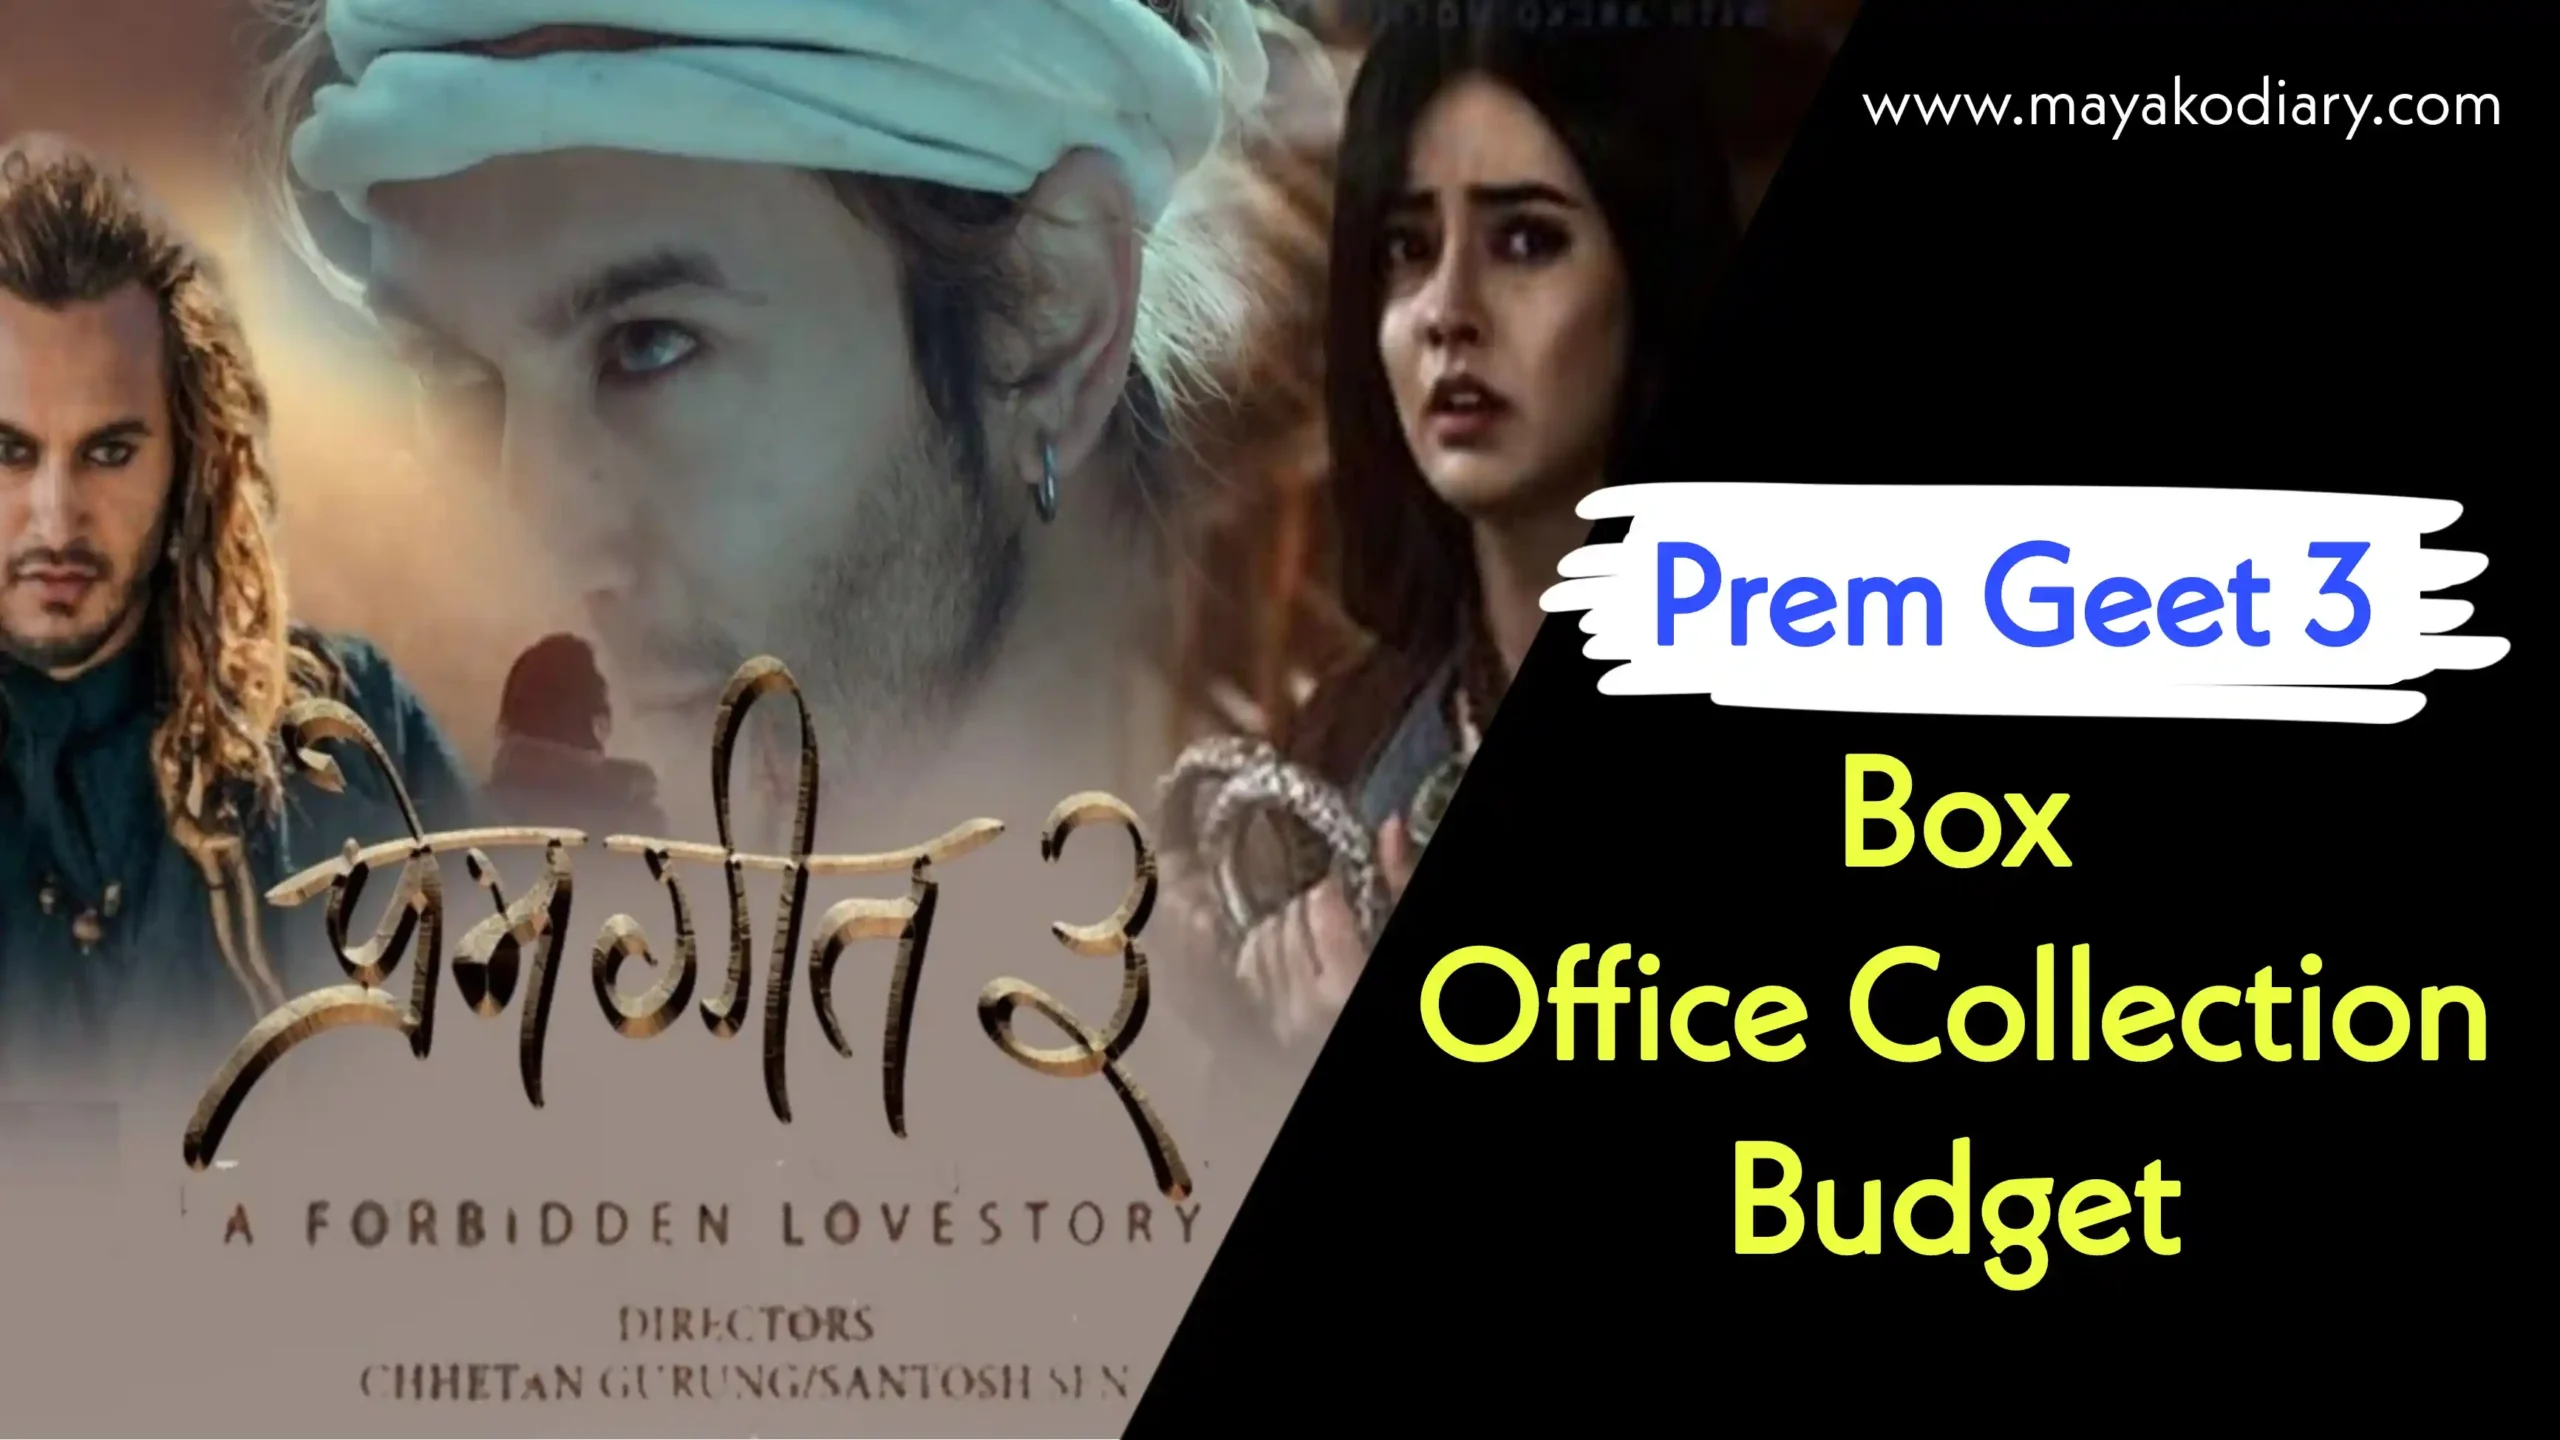 Prem Geet 3 Box Office Collection And Budget